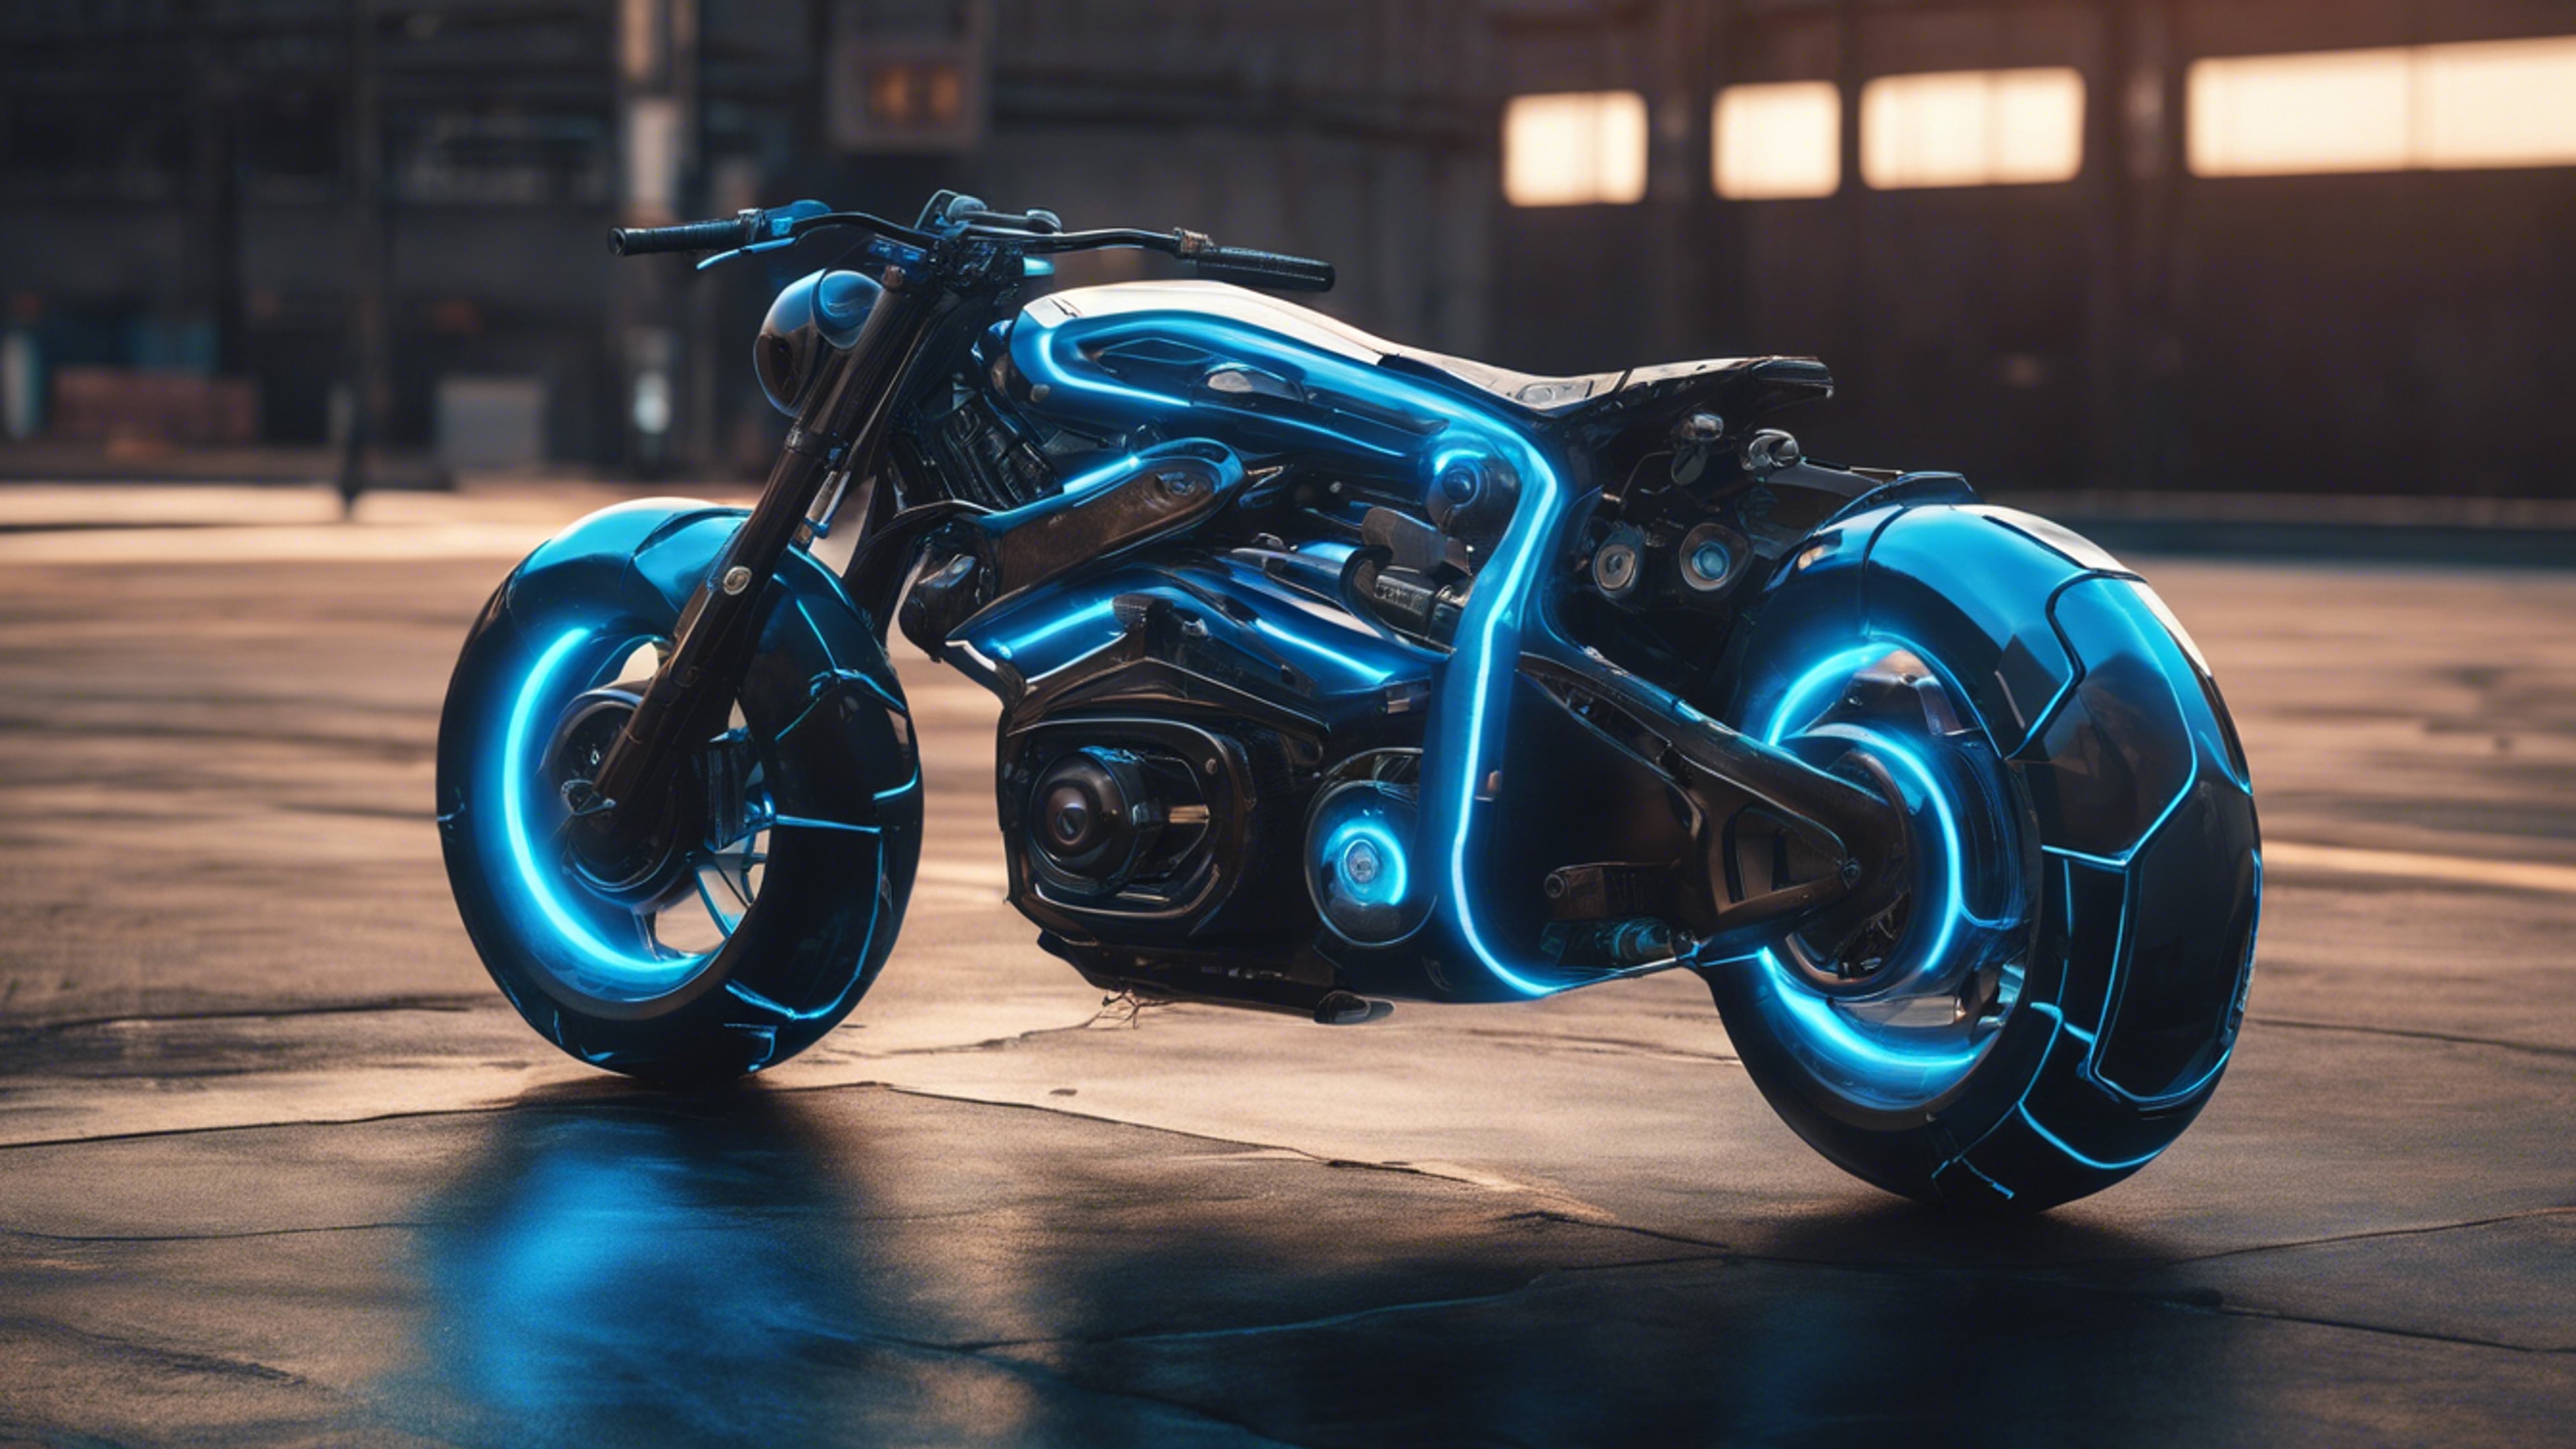 A concept art of a cool futuristic motorcycle, designed in neon black and blue colors.壁紙[616cf7a0093641f39ad2]